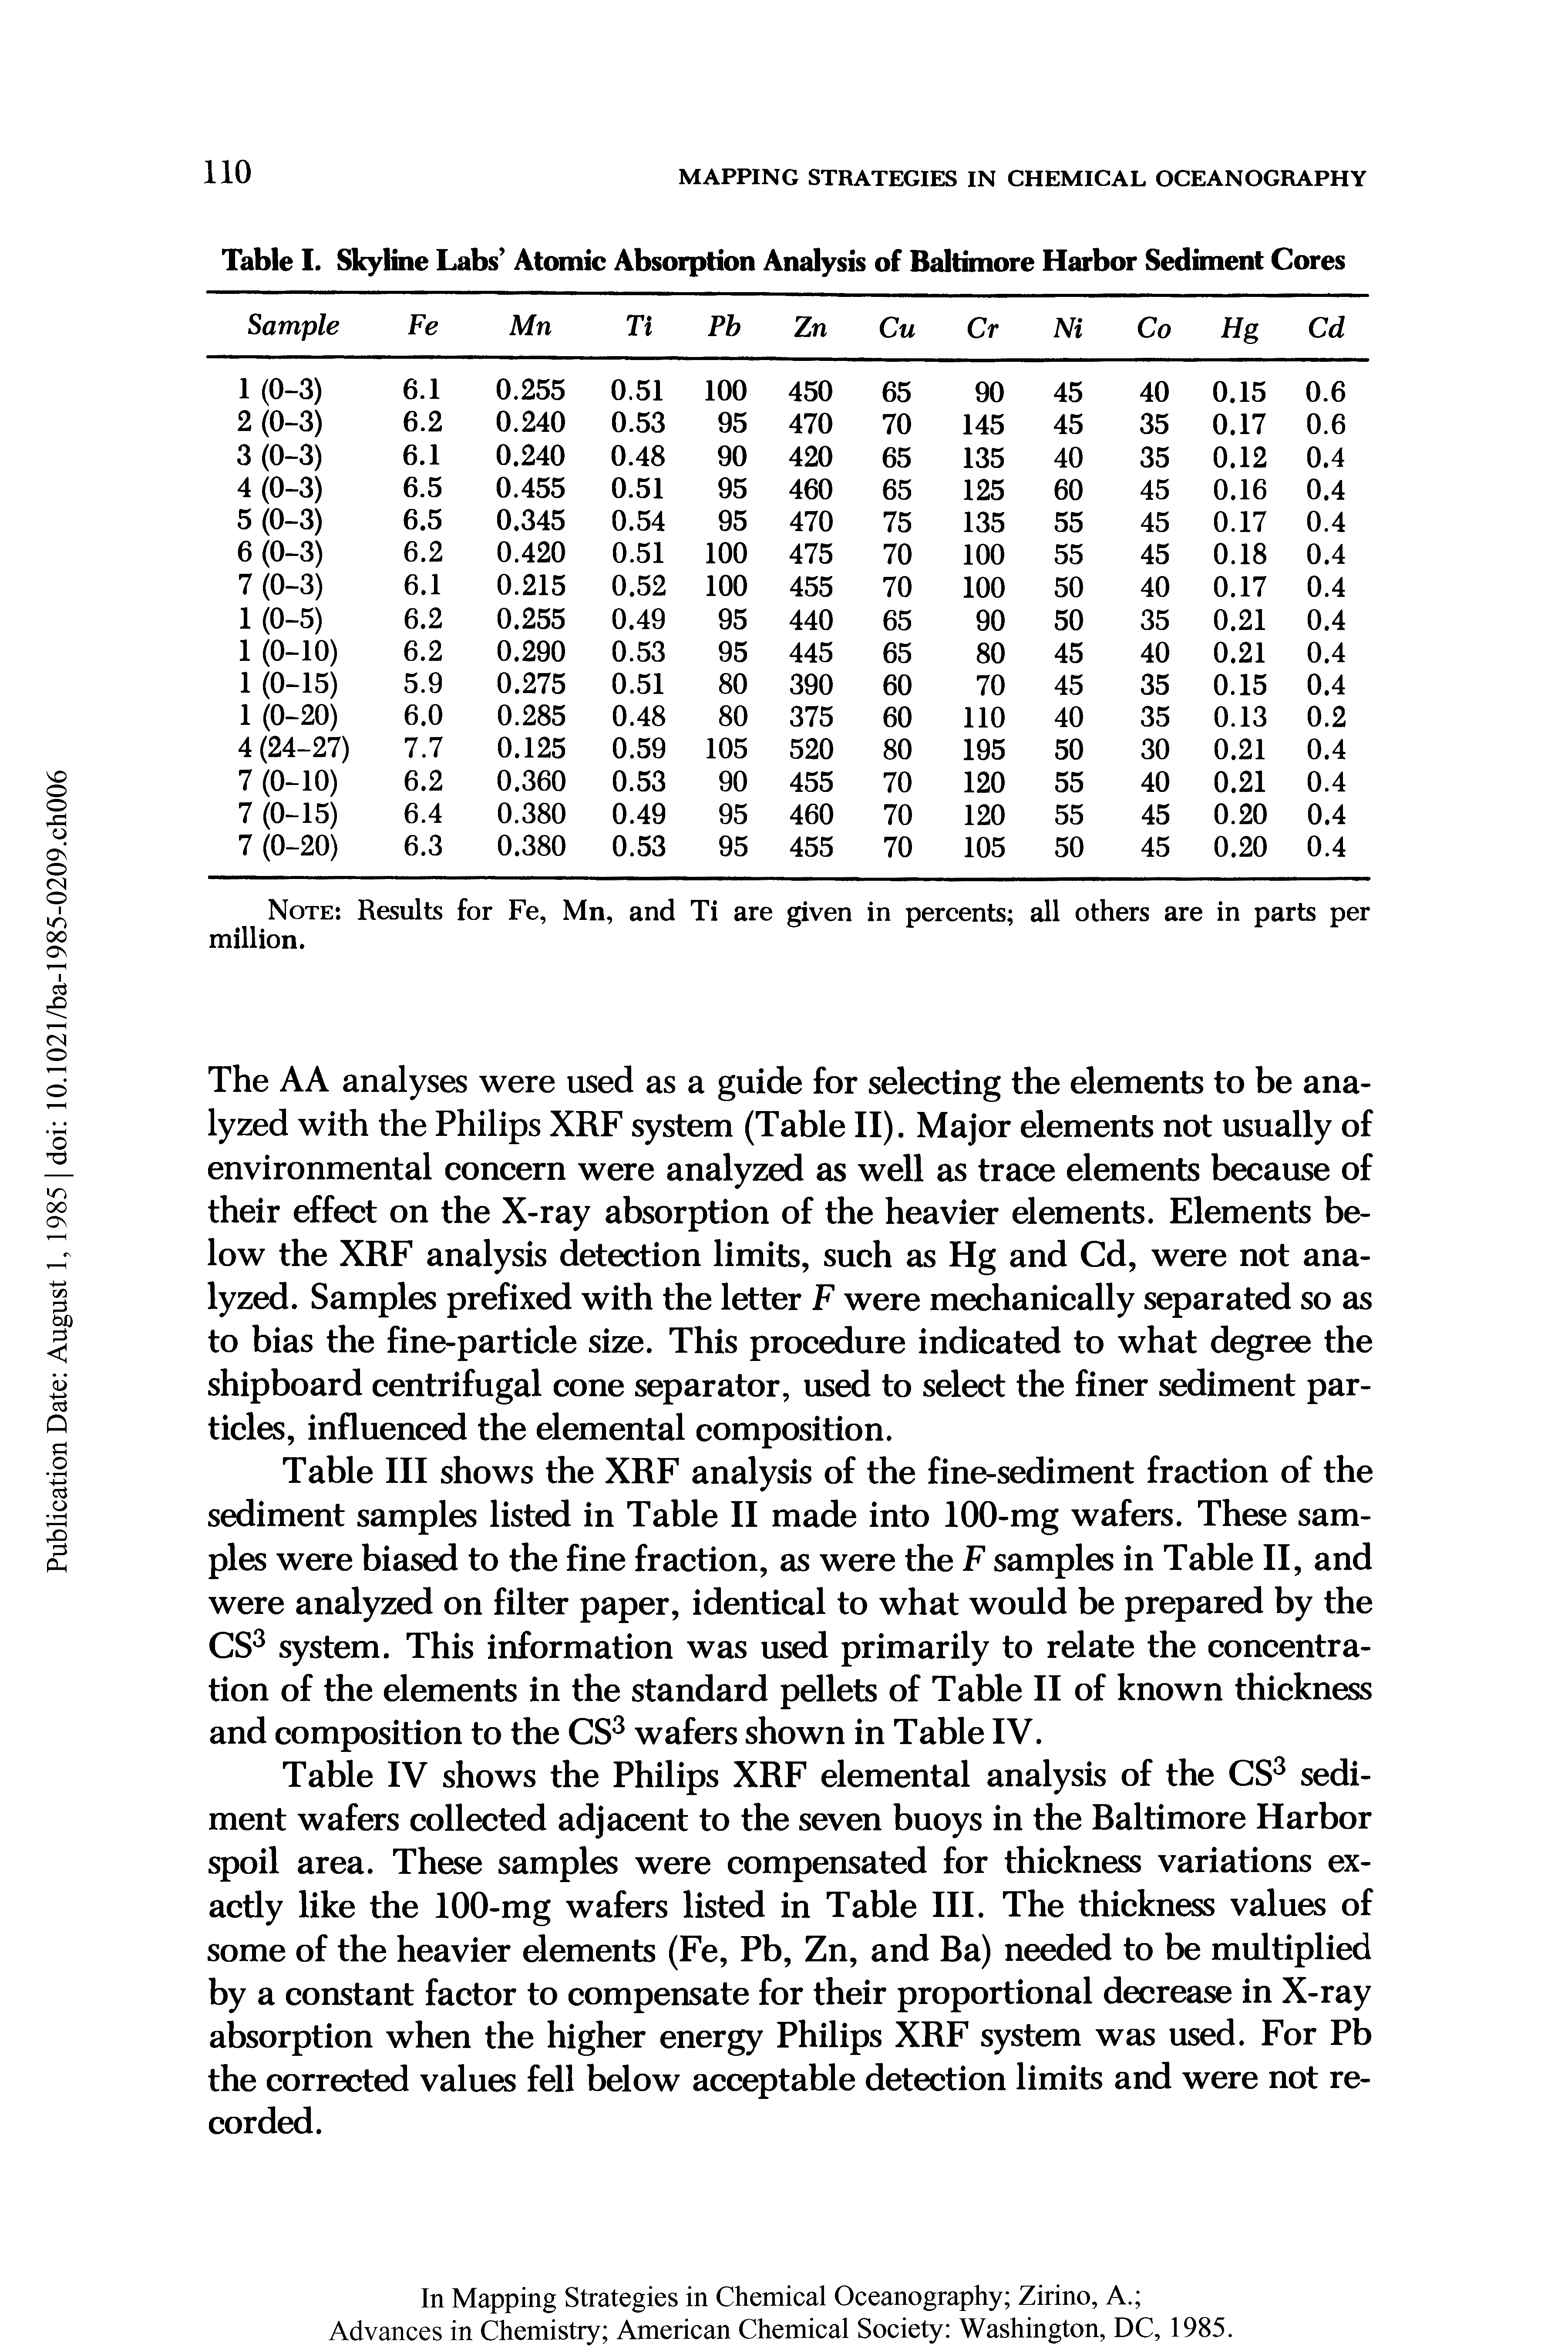 Table IV shows the Philips XRF elemental analysis of the CS sediment wafers collected adjacent to the seven buoys in the Baltimore Harbor spoil area. These samples were compensated for thickness variations exactly like the 100-mg wafers listed in Table III. The thickness values of some of the heavier elements (Fe, Pb, Zn, and Ba) needed to be multiplied by a constant factor to compensate for their proportional decrease in X-ray absorption when the higher energy Philips XRF system was used. For Pb the corrected values fell below acceptable detection limits and were not recorded.